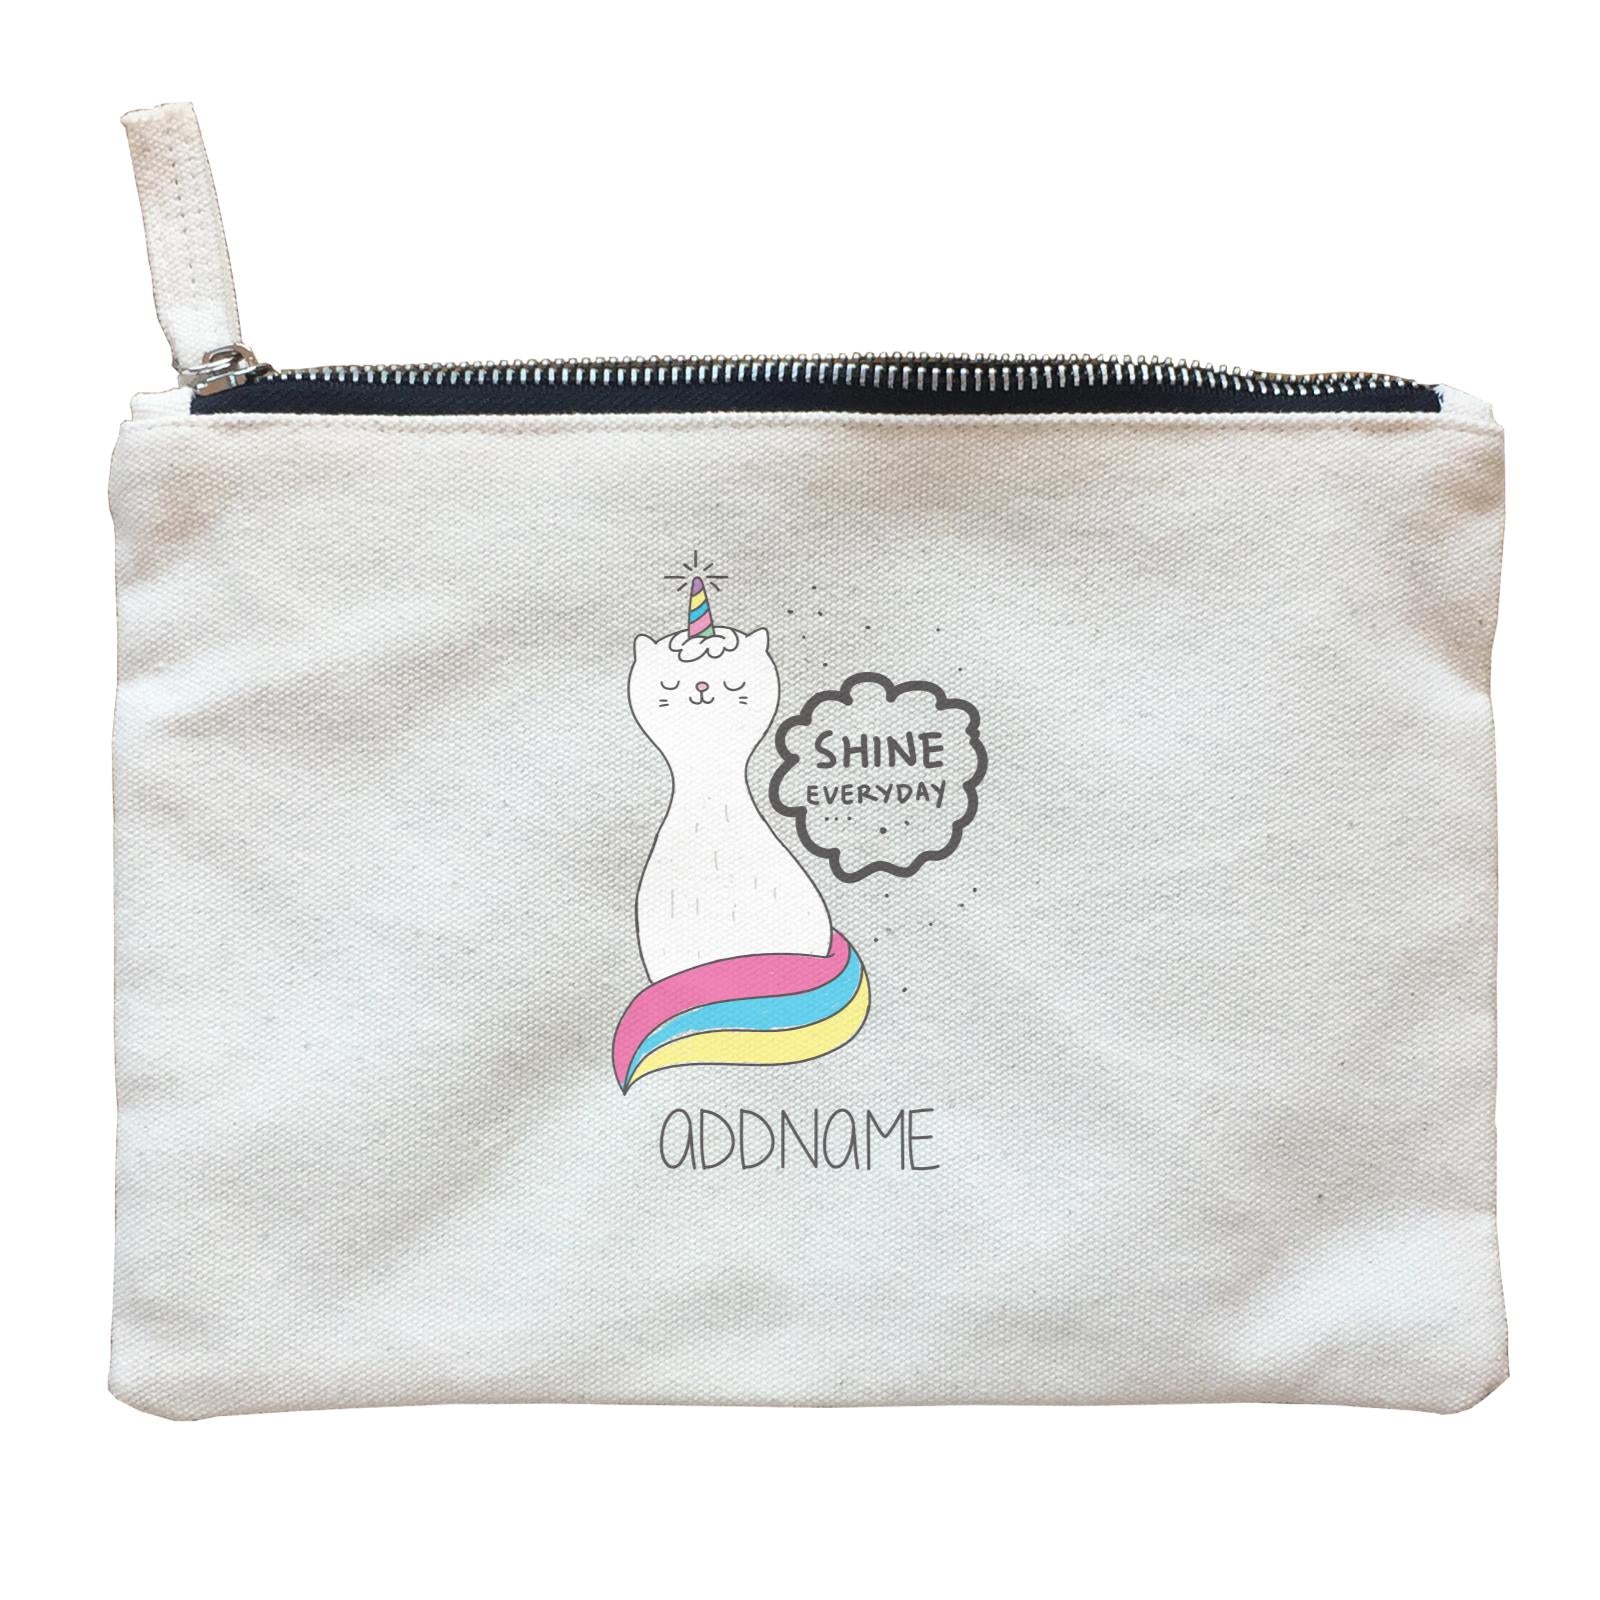 Cool Cute Animals Cats Unicorn Cat Shine Everyday Addname Zipper Pouch